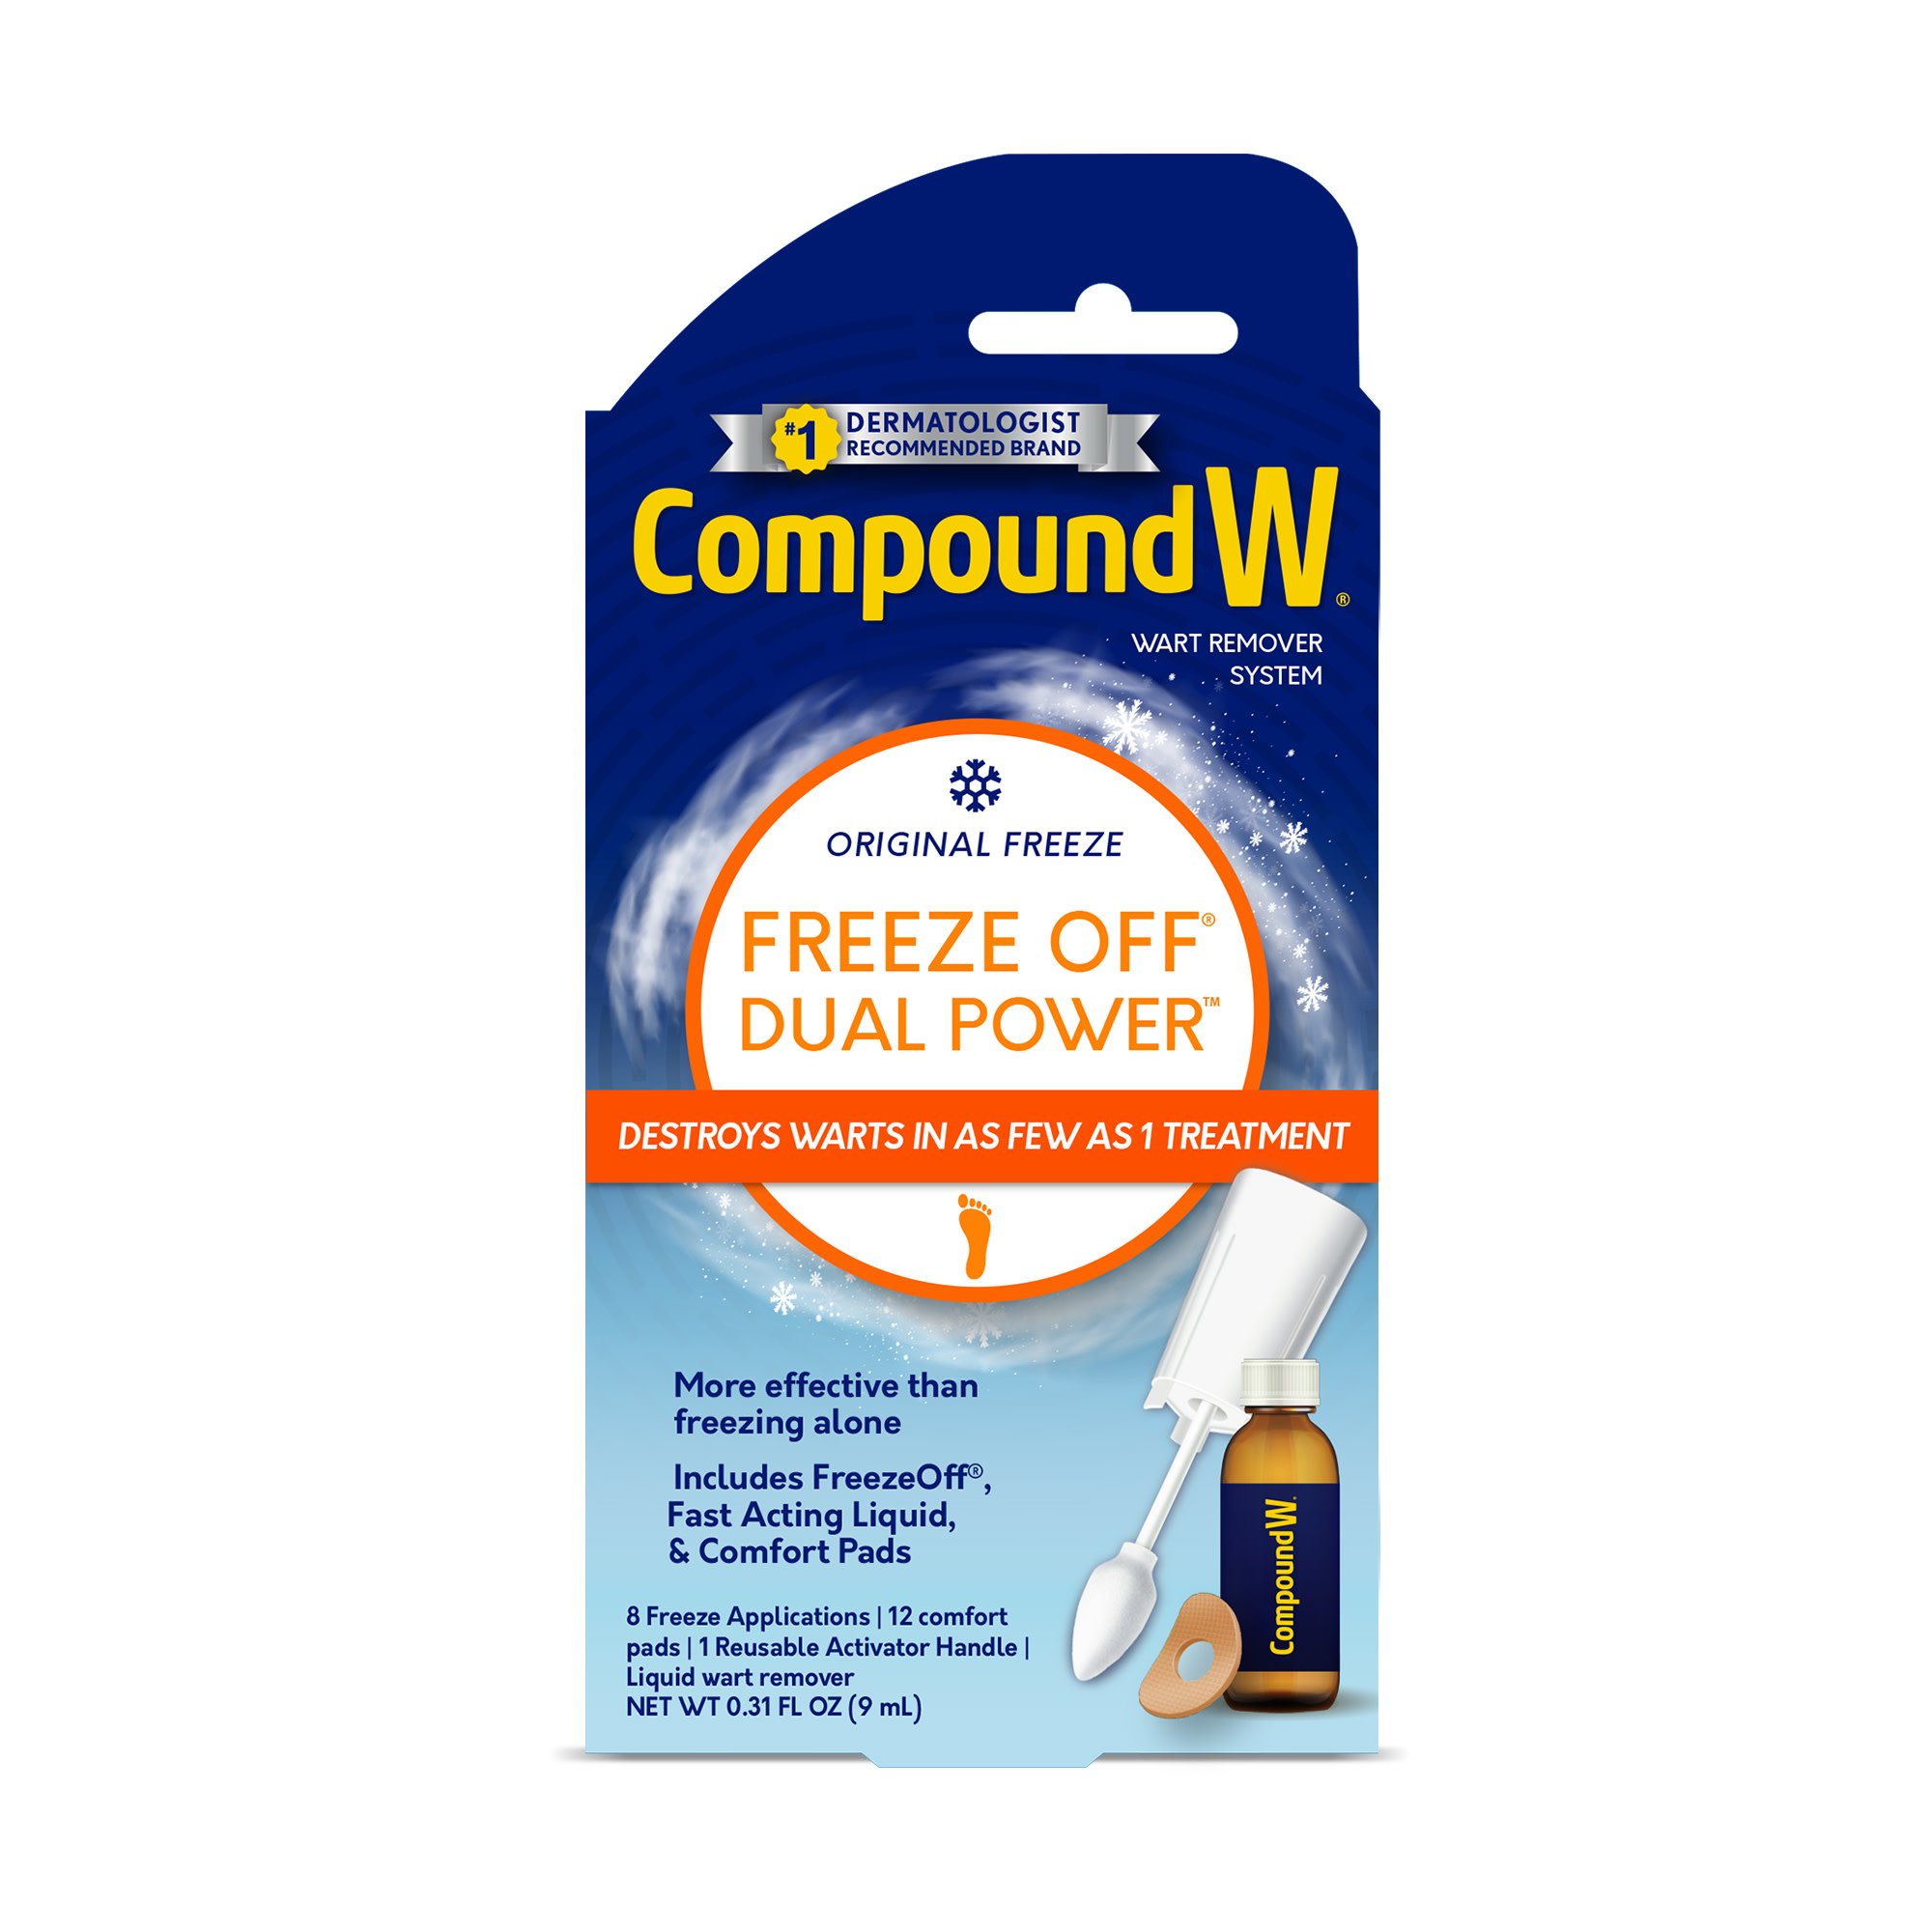 Compound W Freeze Off Advanced Wart Remover with Accu-Freeze, 15